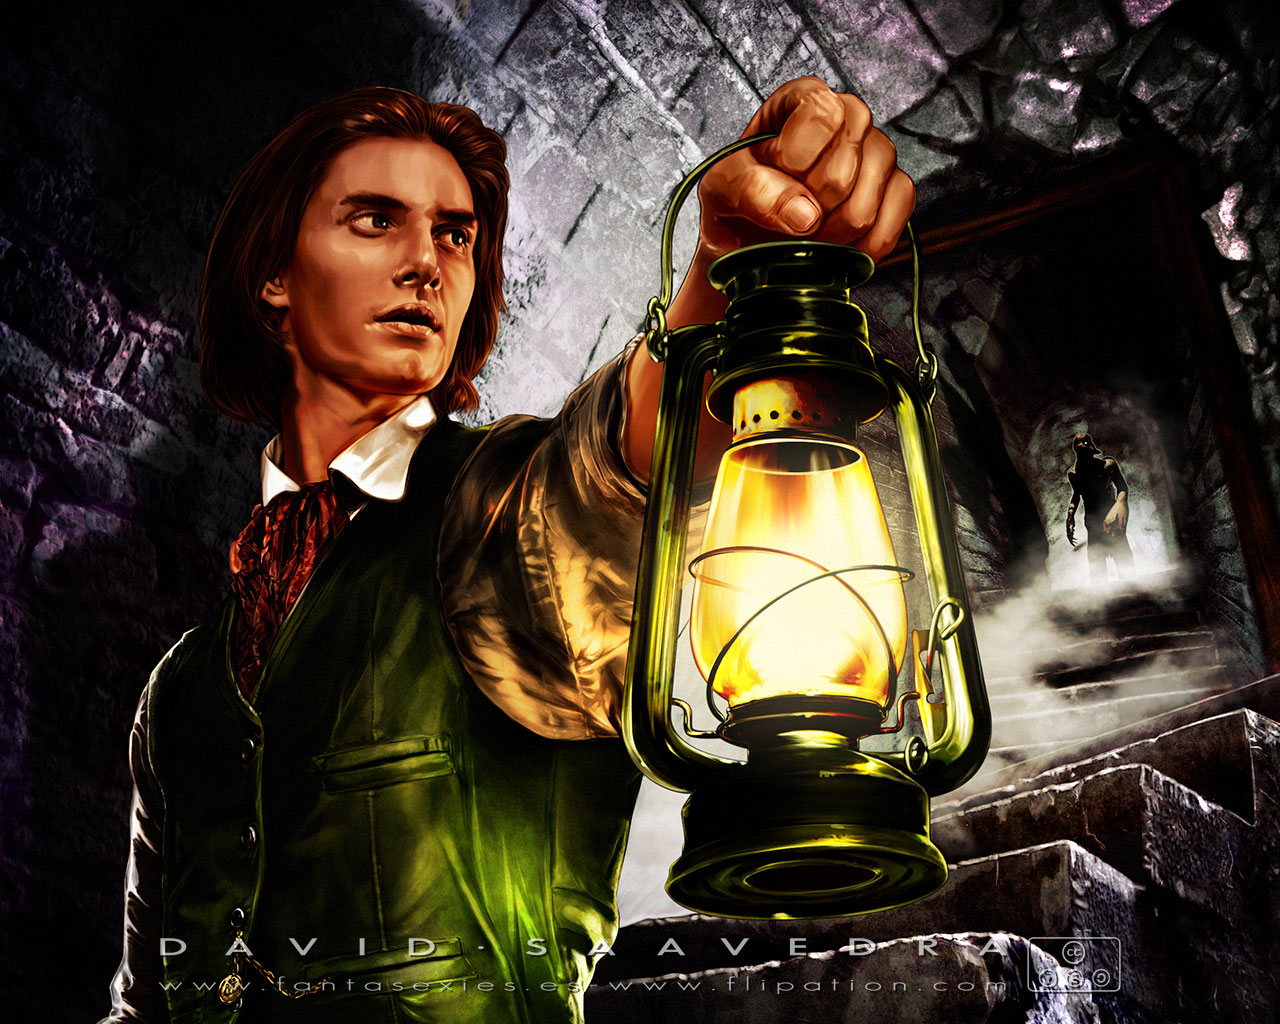 Painting Airbrushing Games Wallpaper Edition Of Link Amnesia The Dark